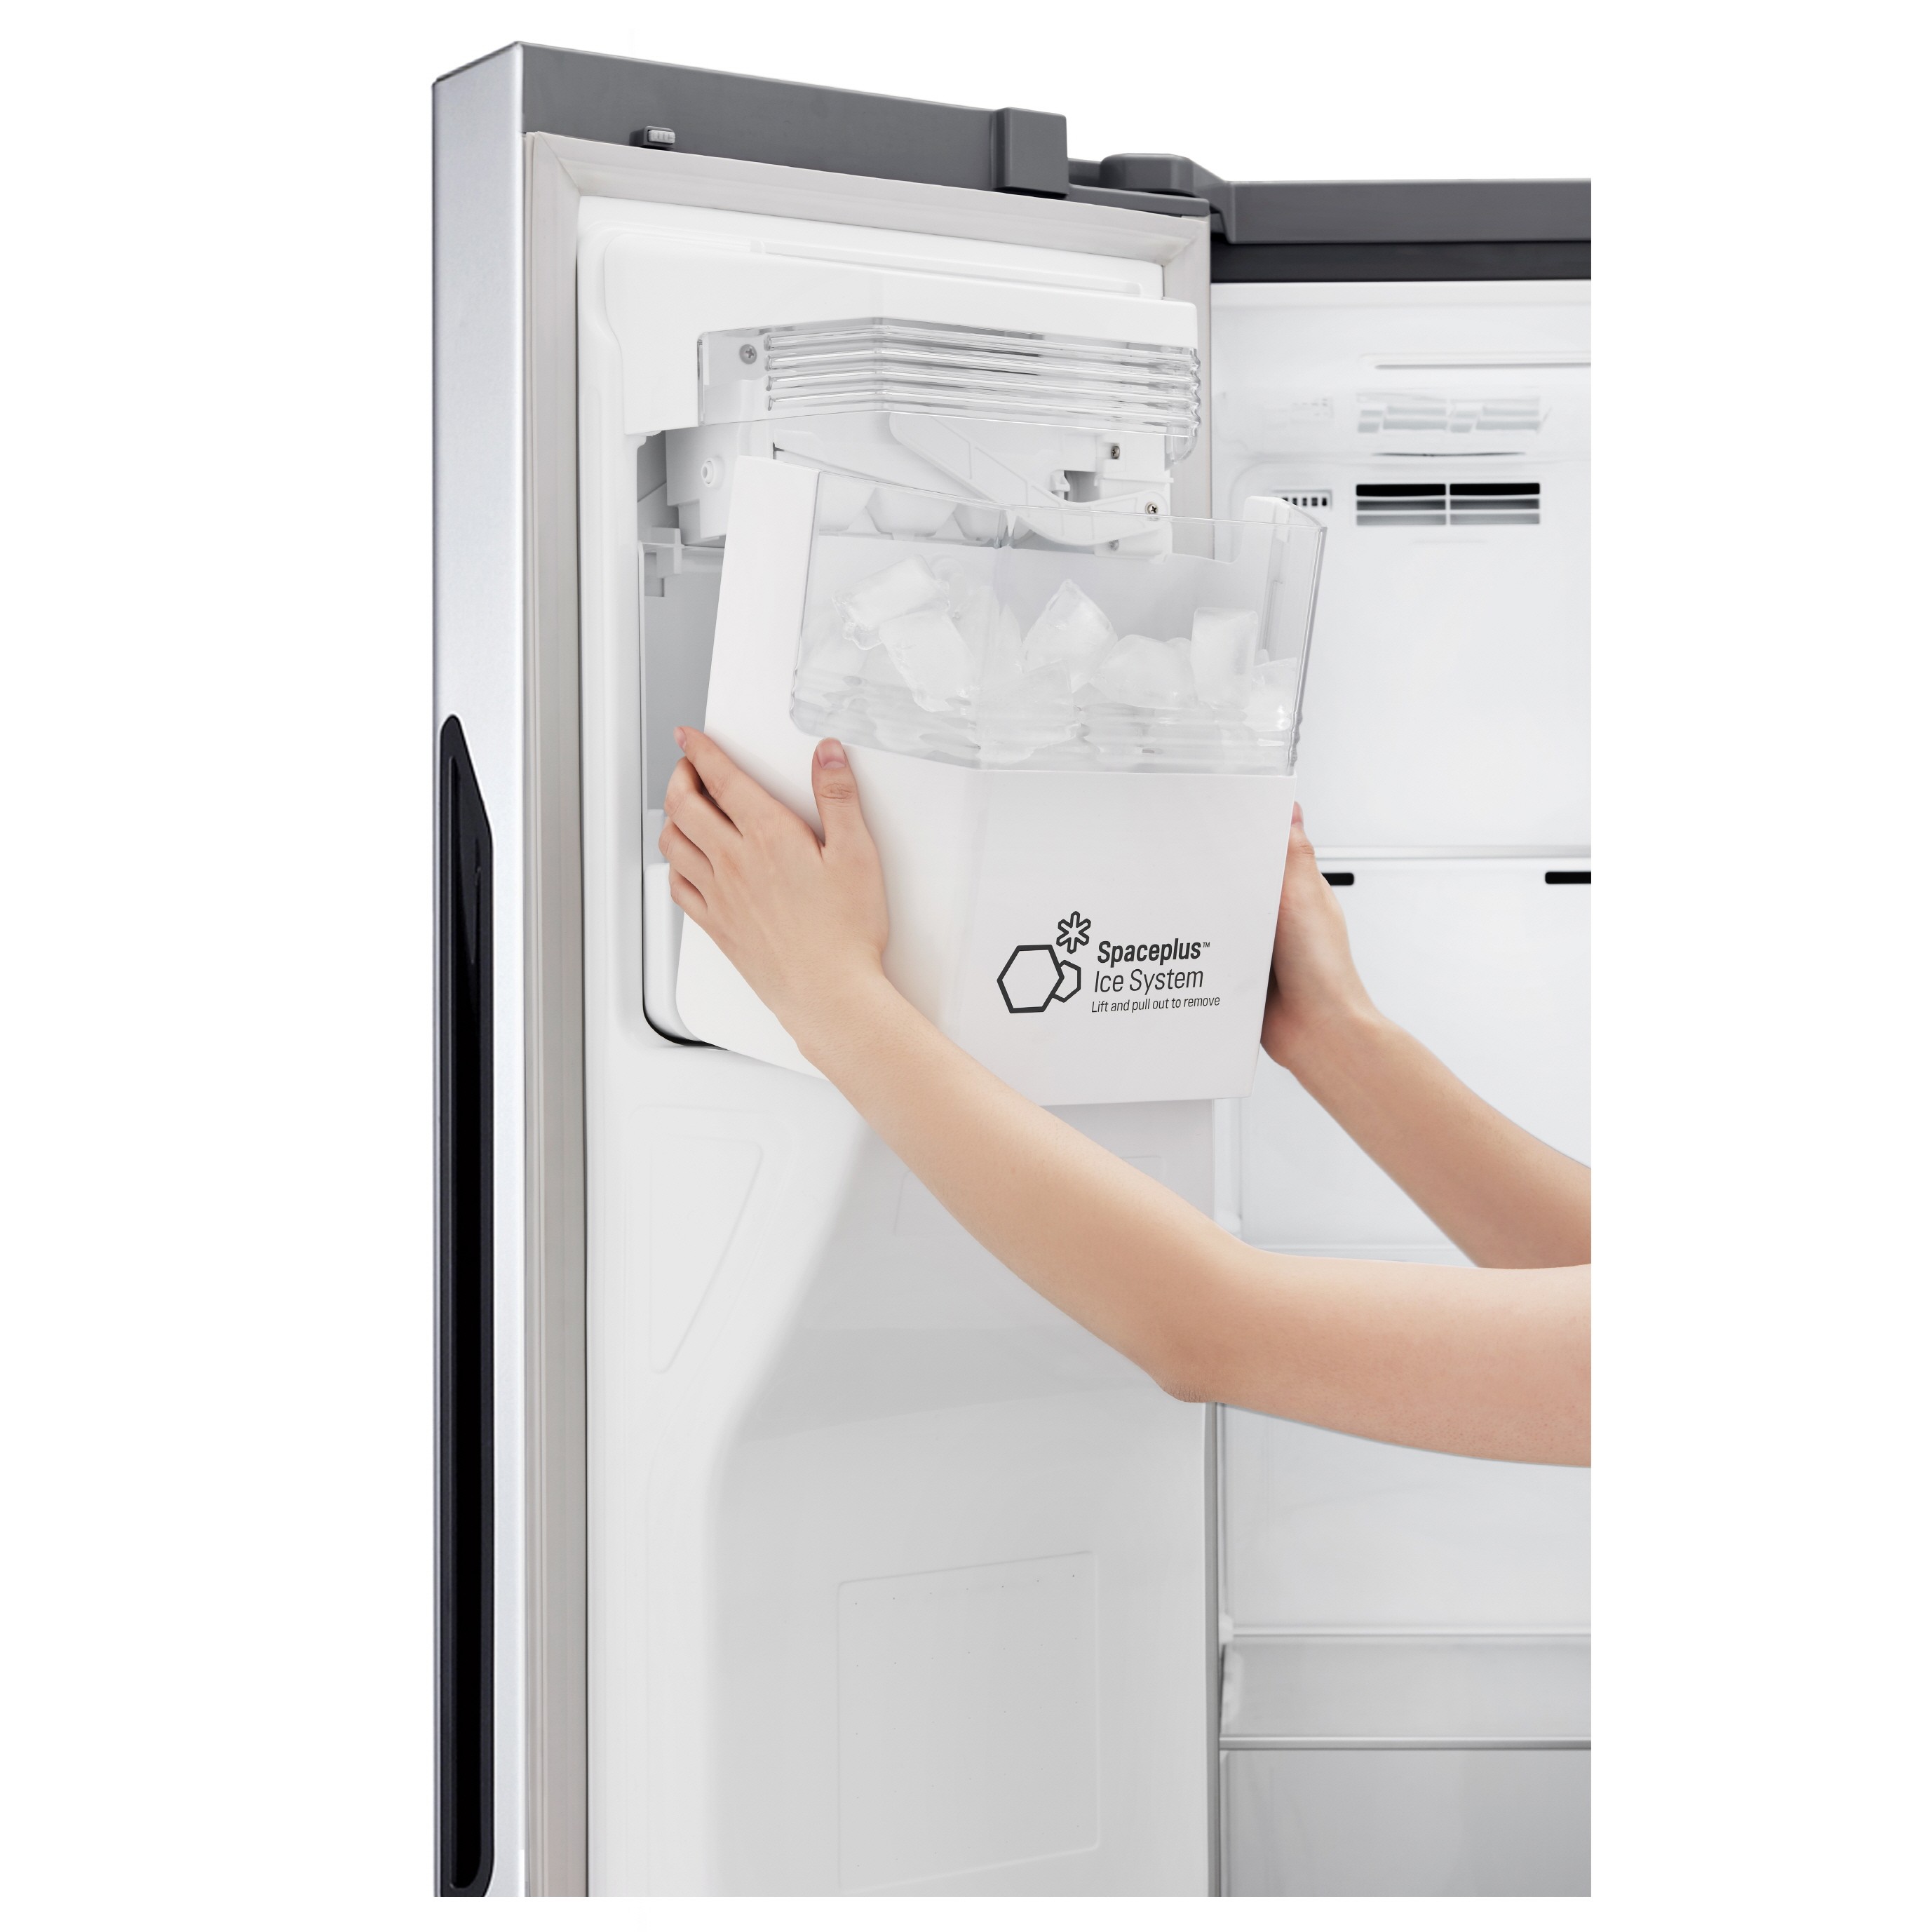 A close-up view of showing LG’s patented door-ice making refrigerator technology.